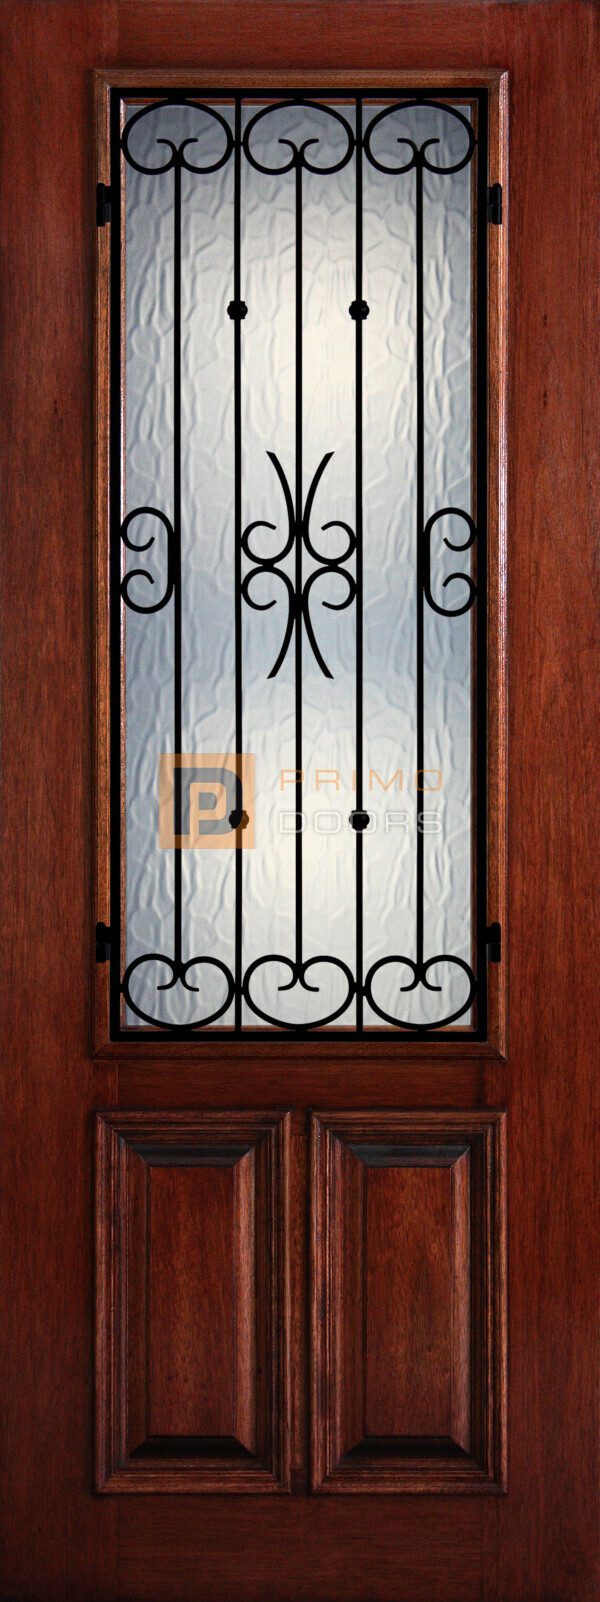 8′ 2/3 Lite Decorative Glass with Iron Grill - Mahogany Single Front Door – PD 3080-23 BALF